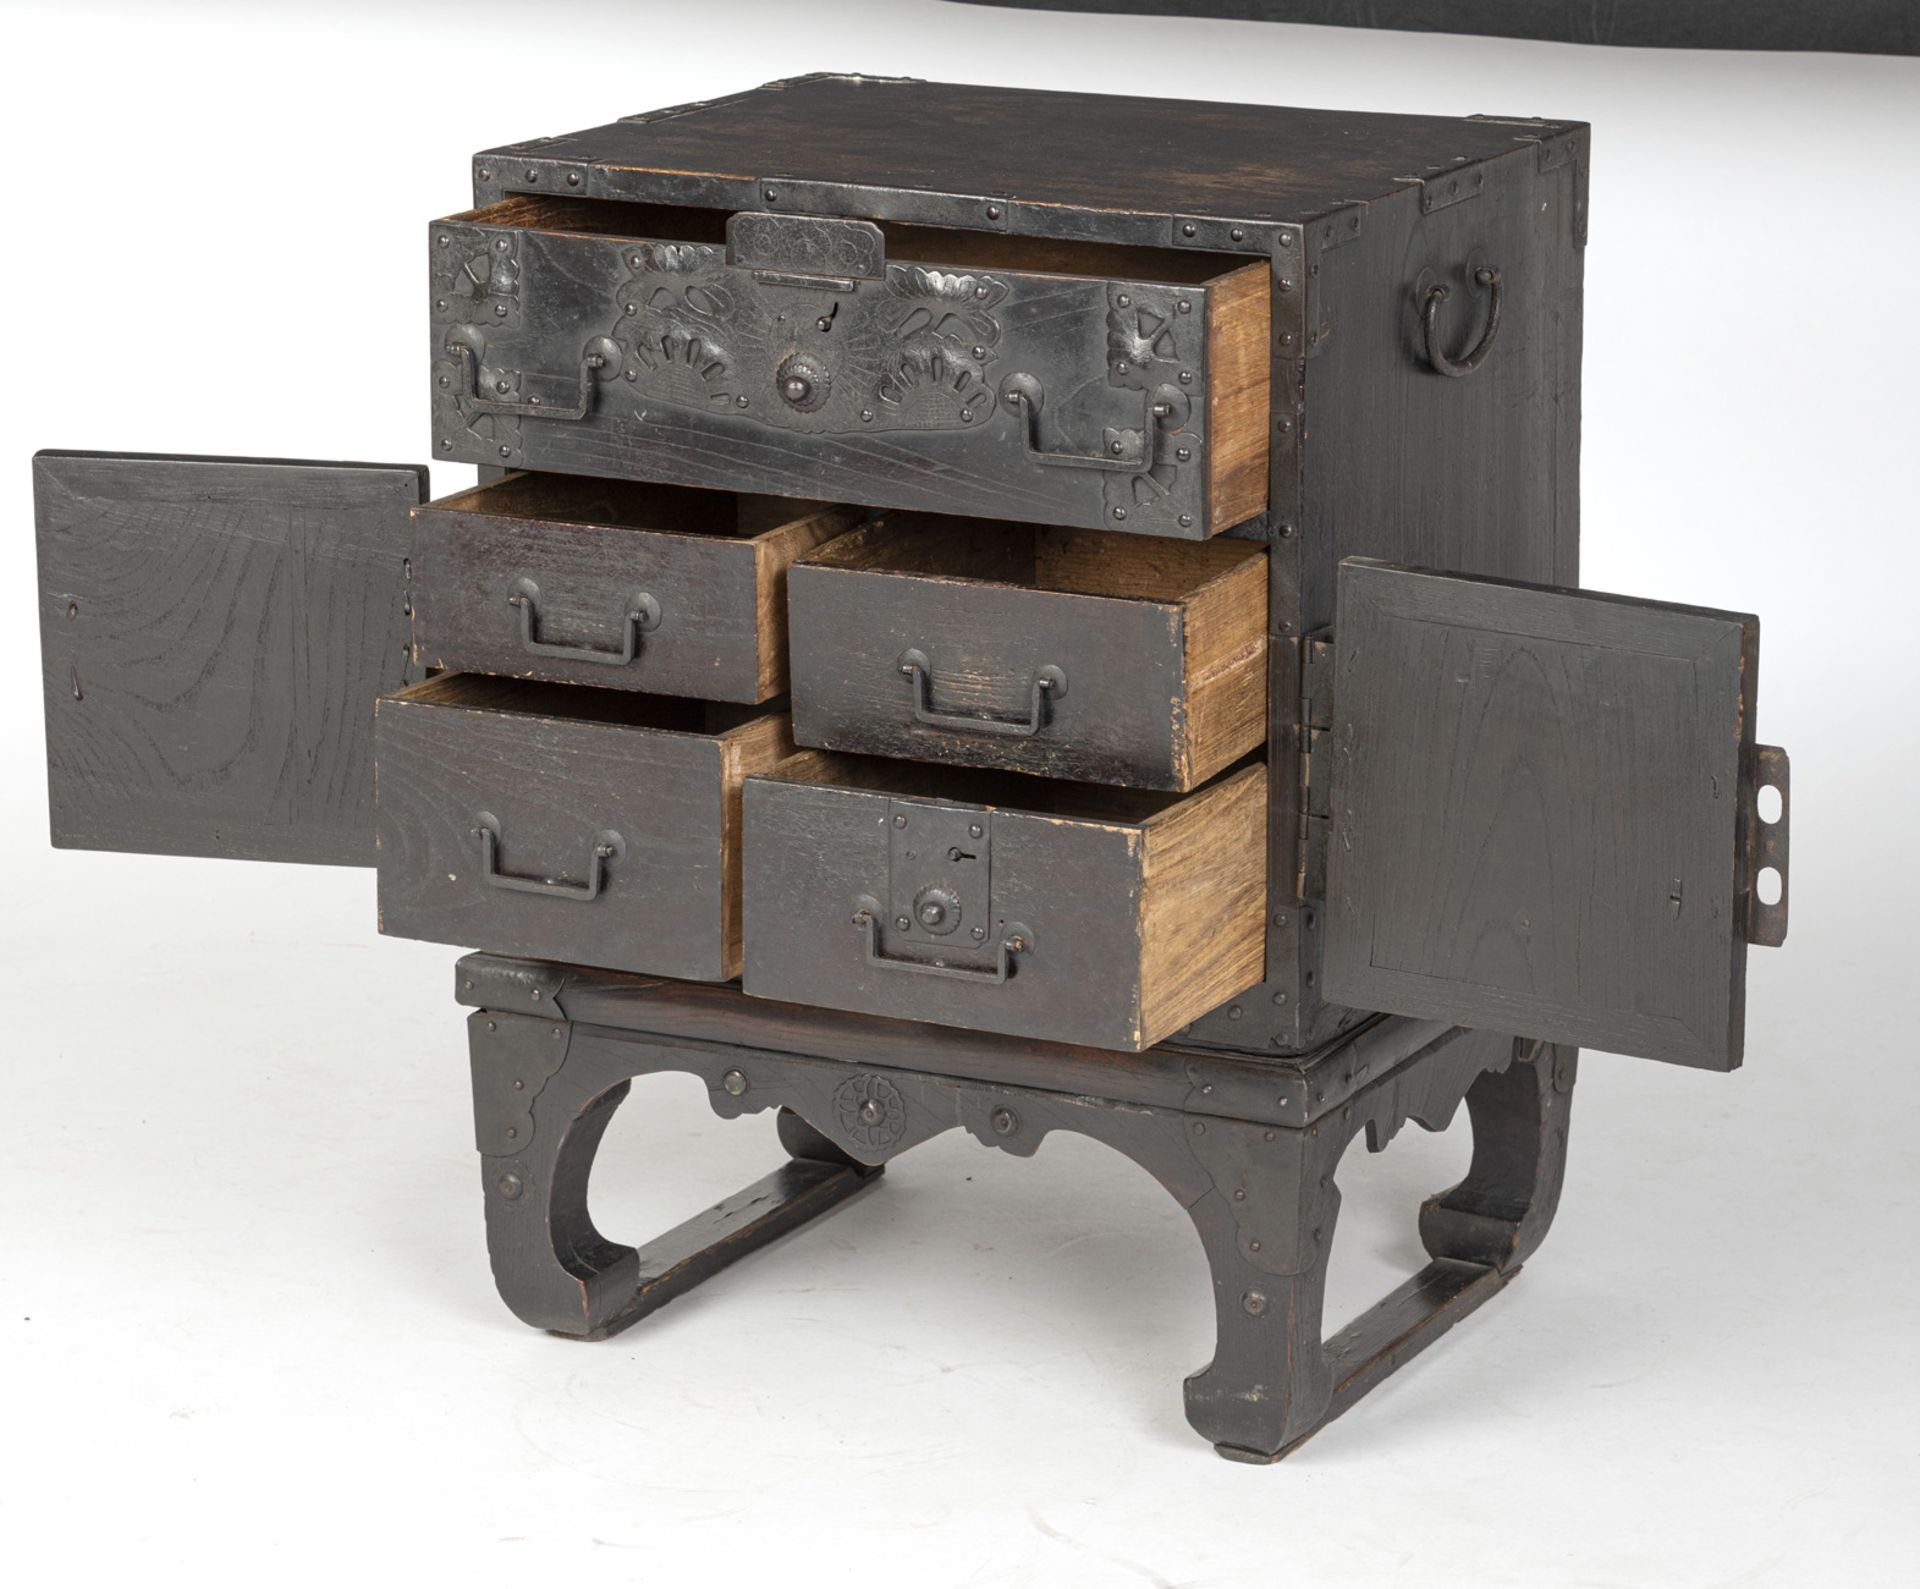 A WOODEN CHEST FOR USE ON A SHIP (FUNA DANSU) WITH IRON FITTINGS ON A STAND - Image 2 of 4